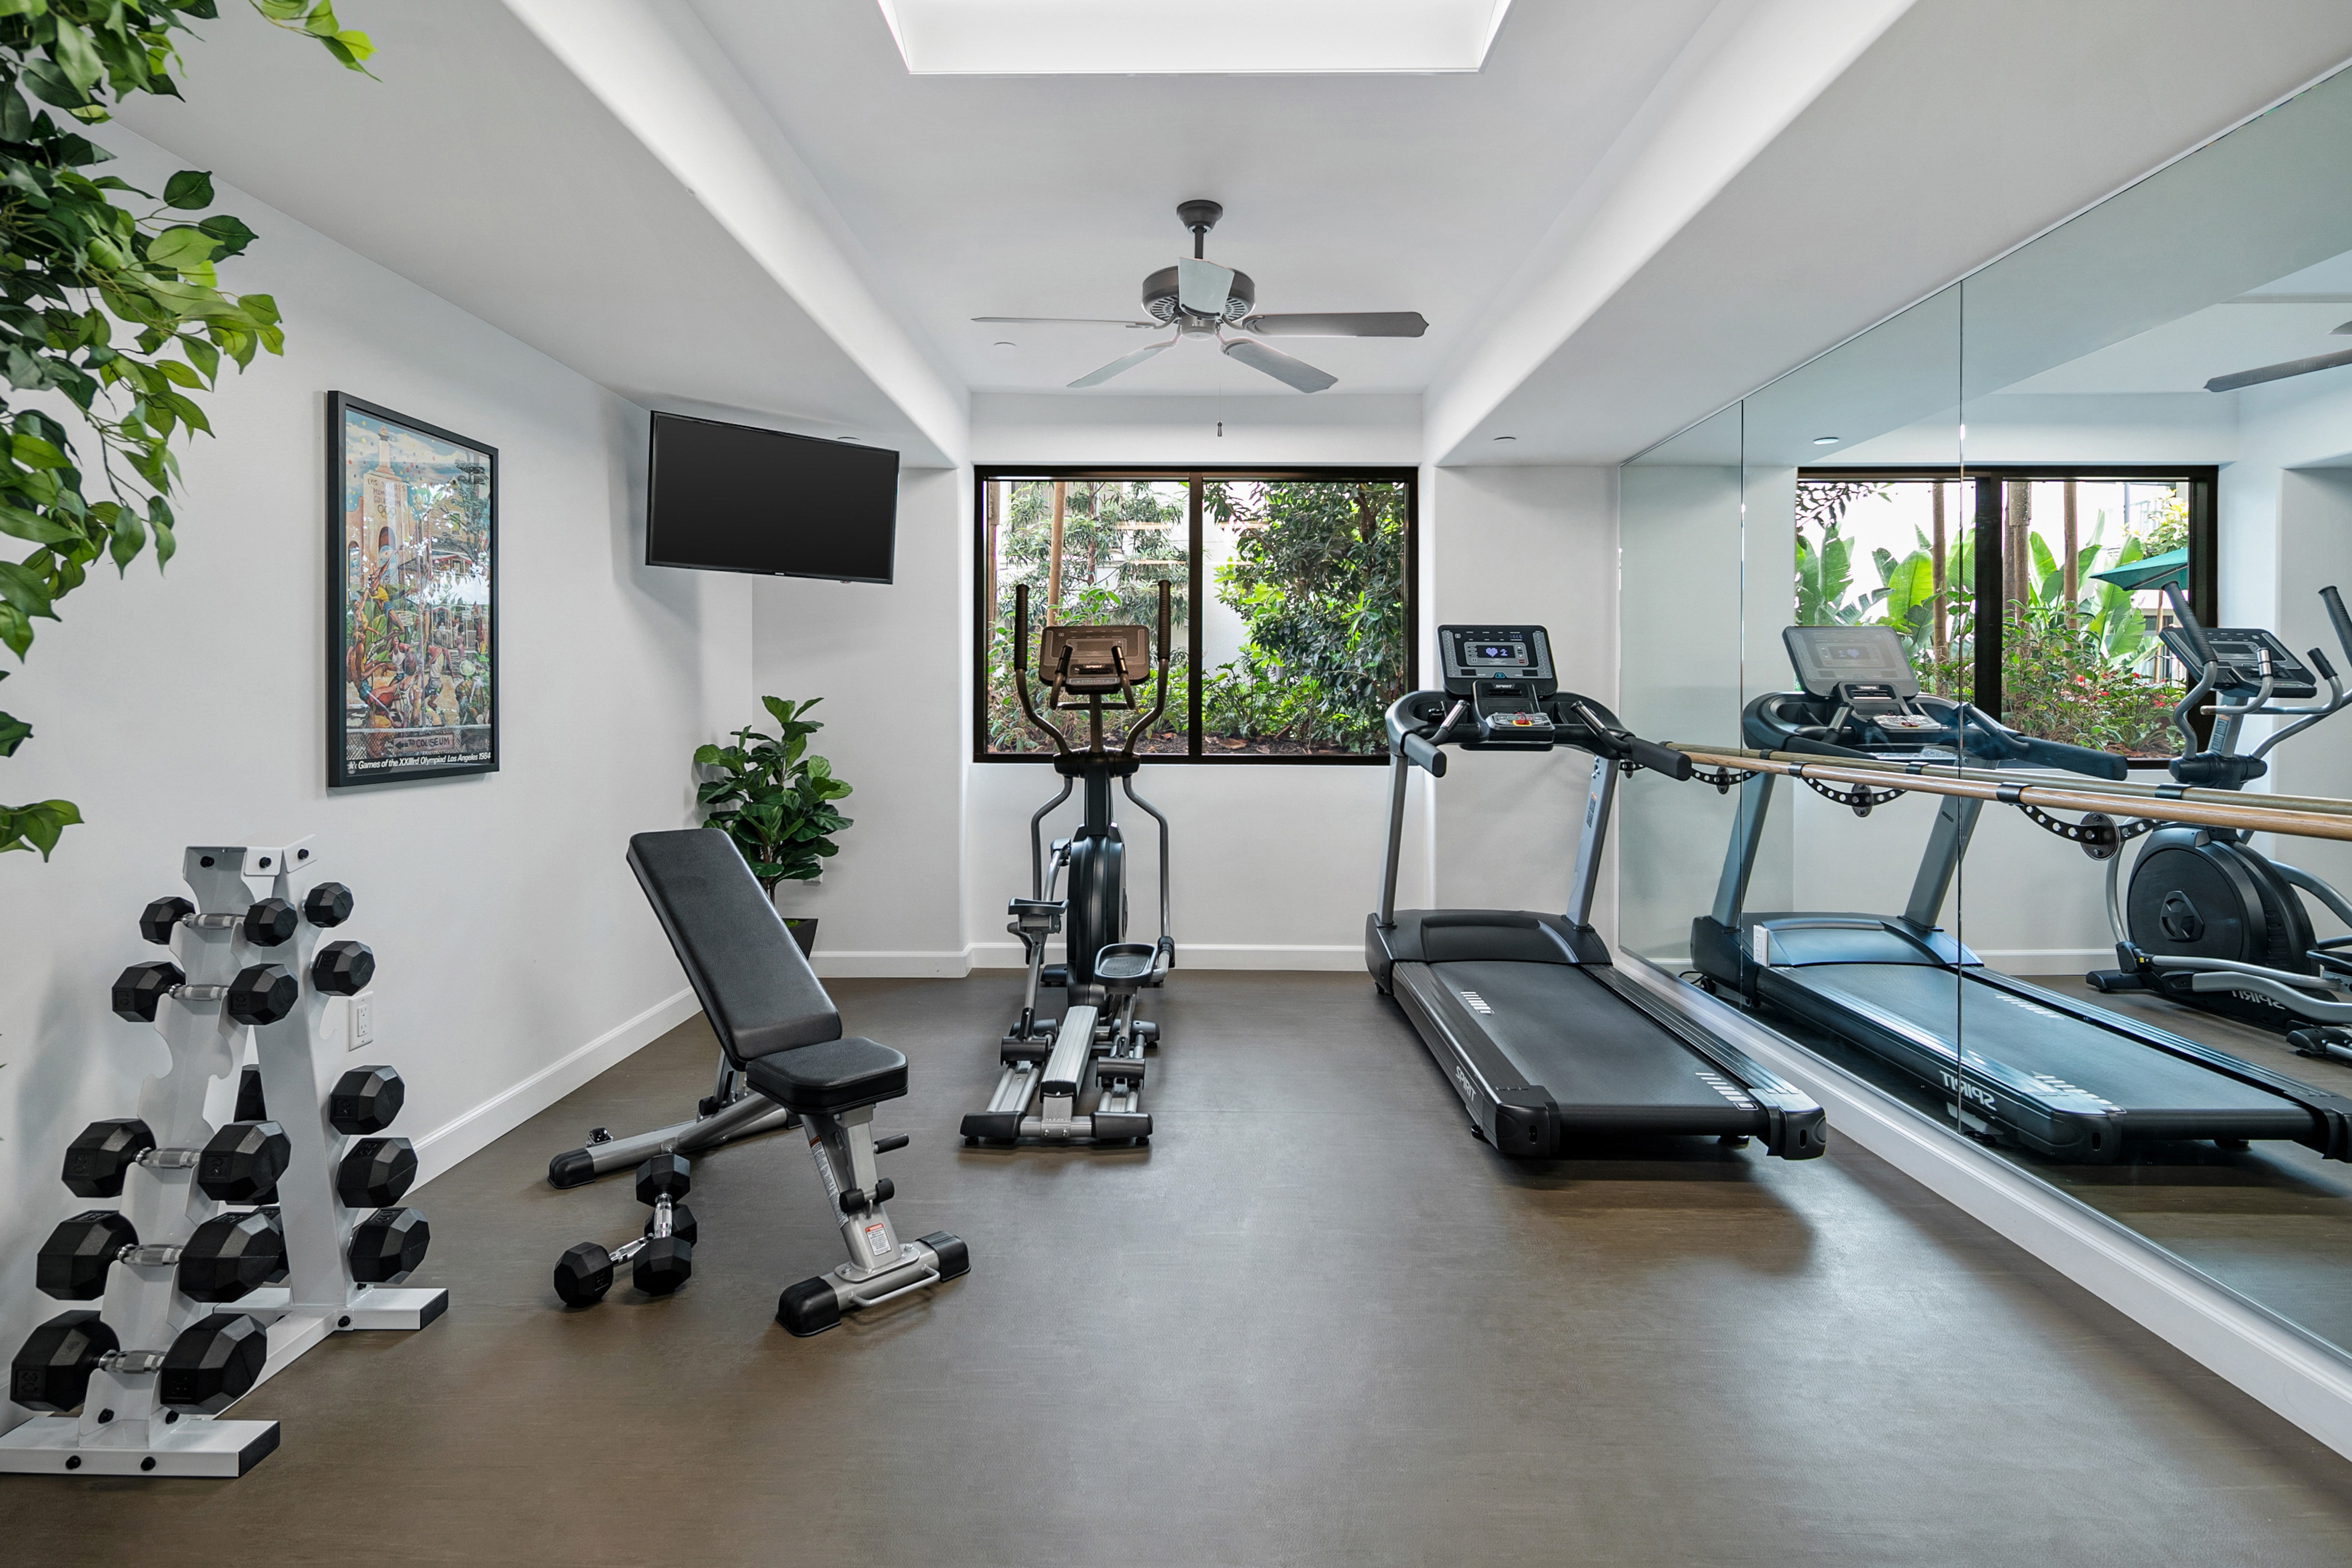 Exercise room with treadmill, elliptical, and 12 dumbbells